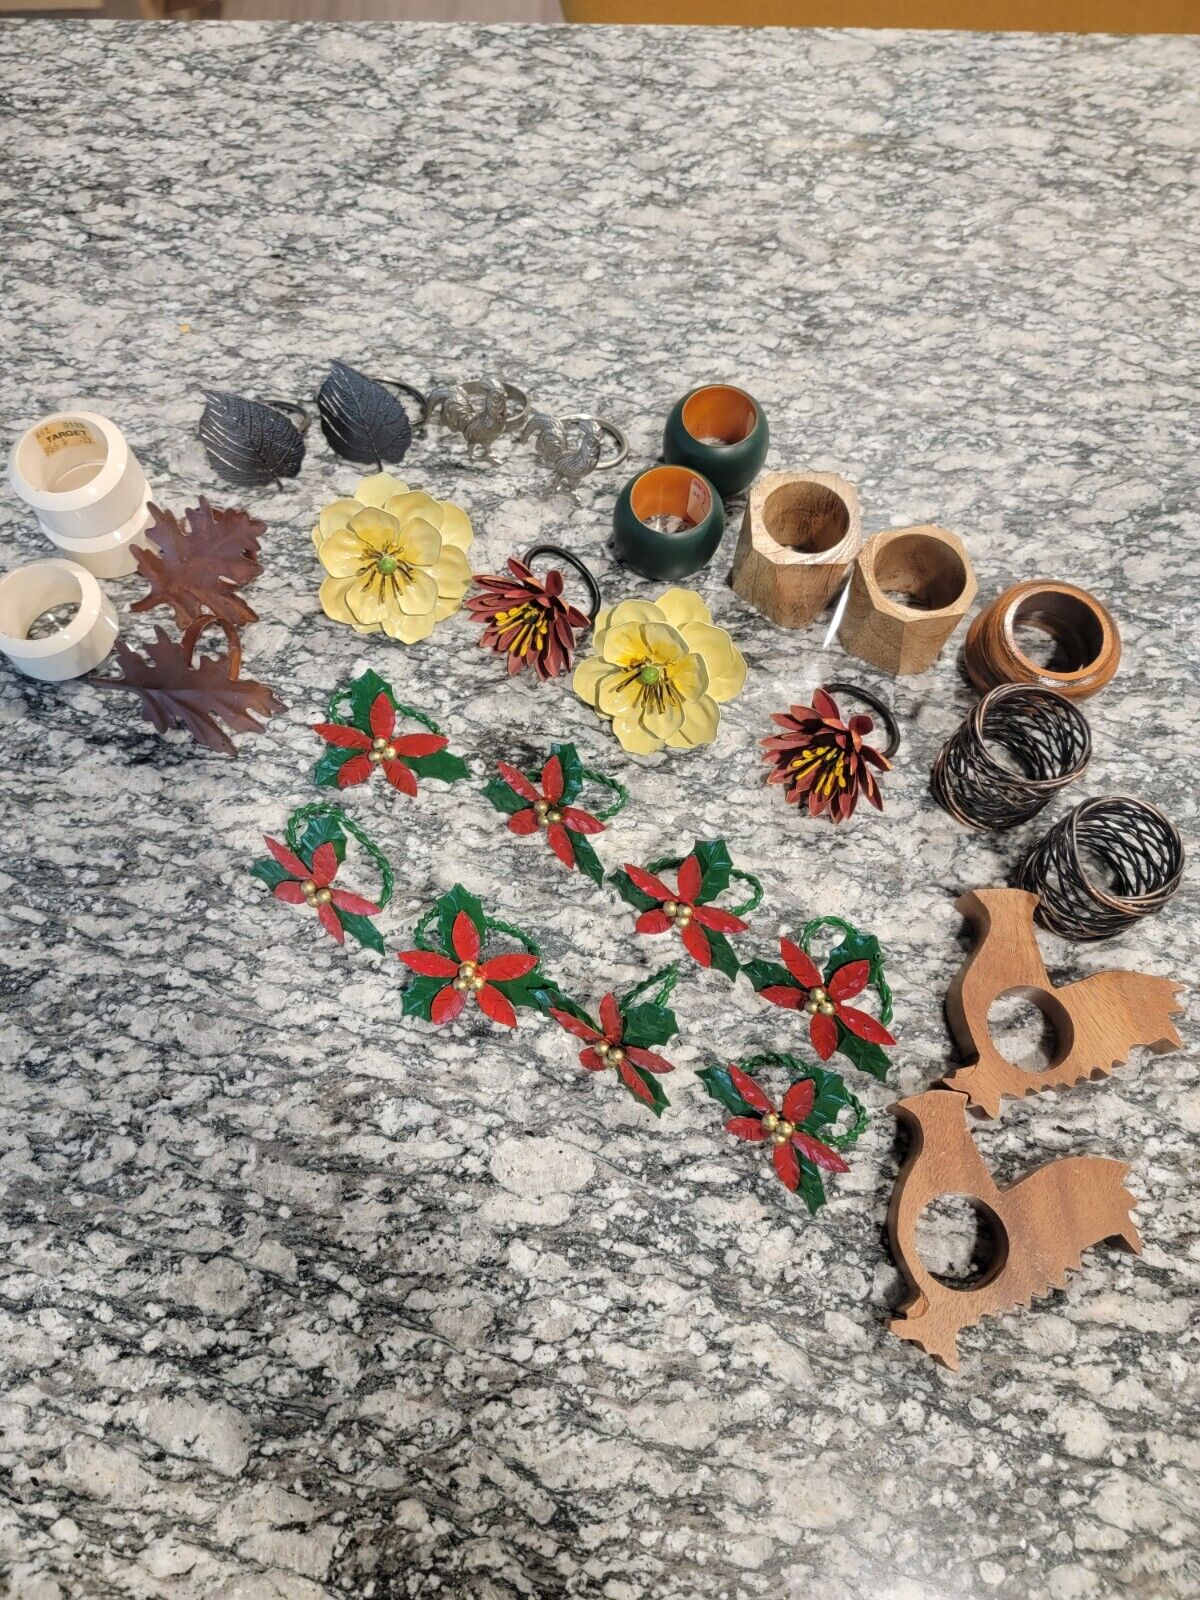 Lot of 31 Vintage Napkin Rings Poinsettia Flowers Roosters Leaves and More